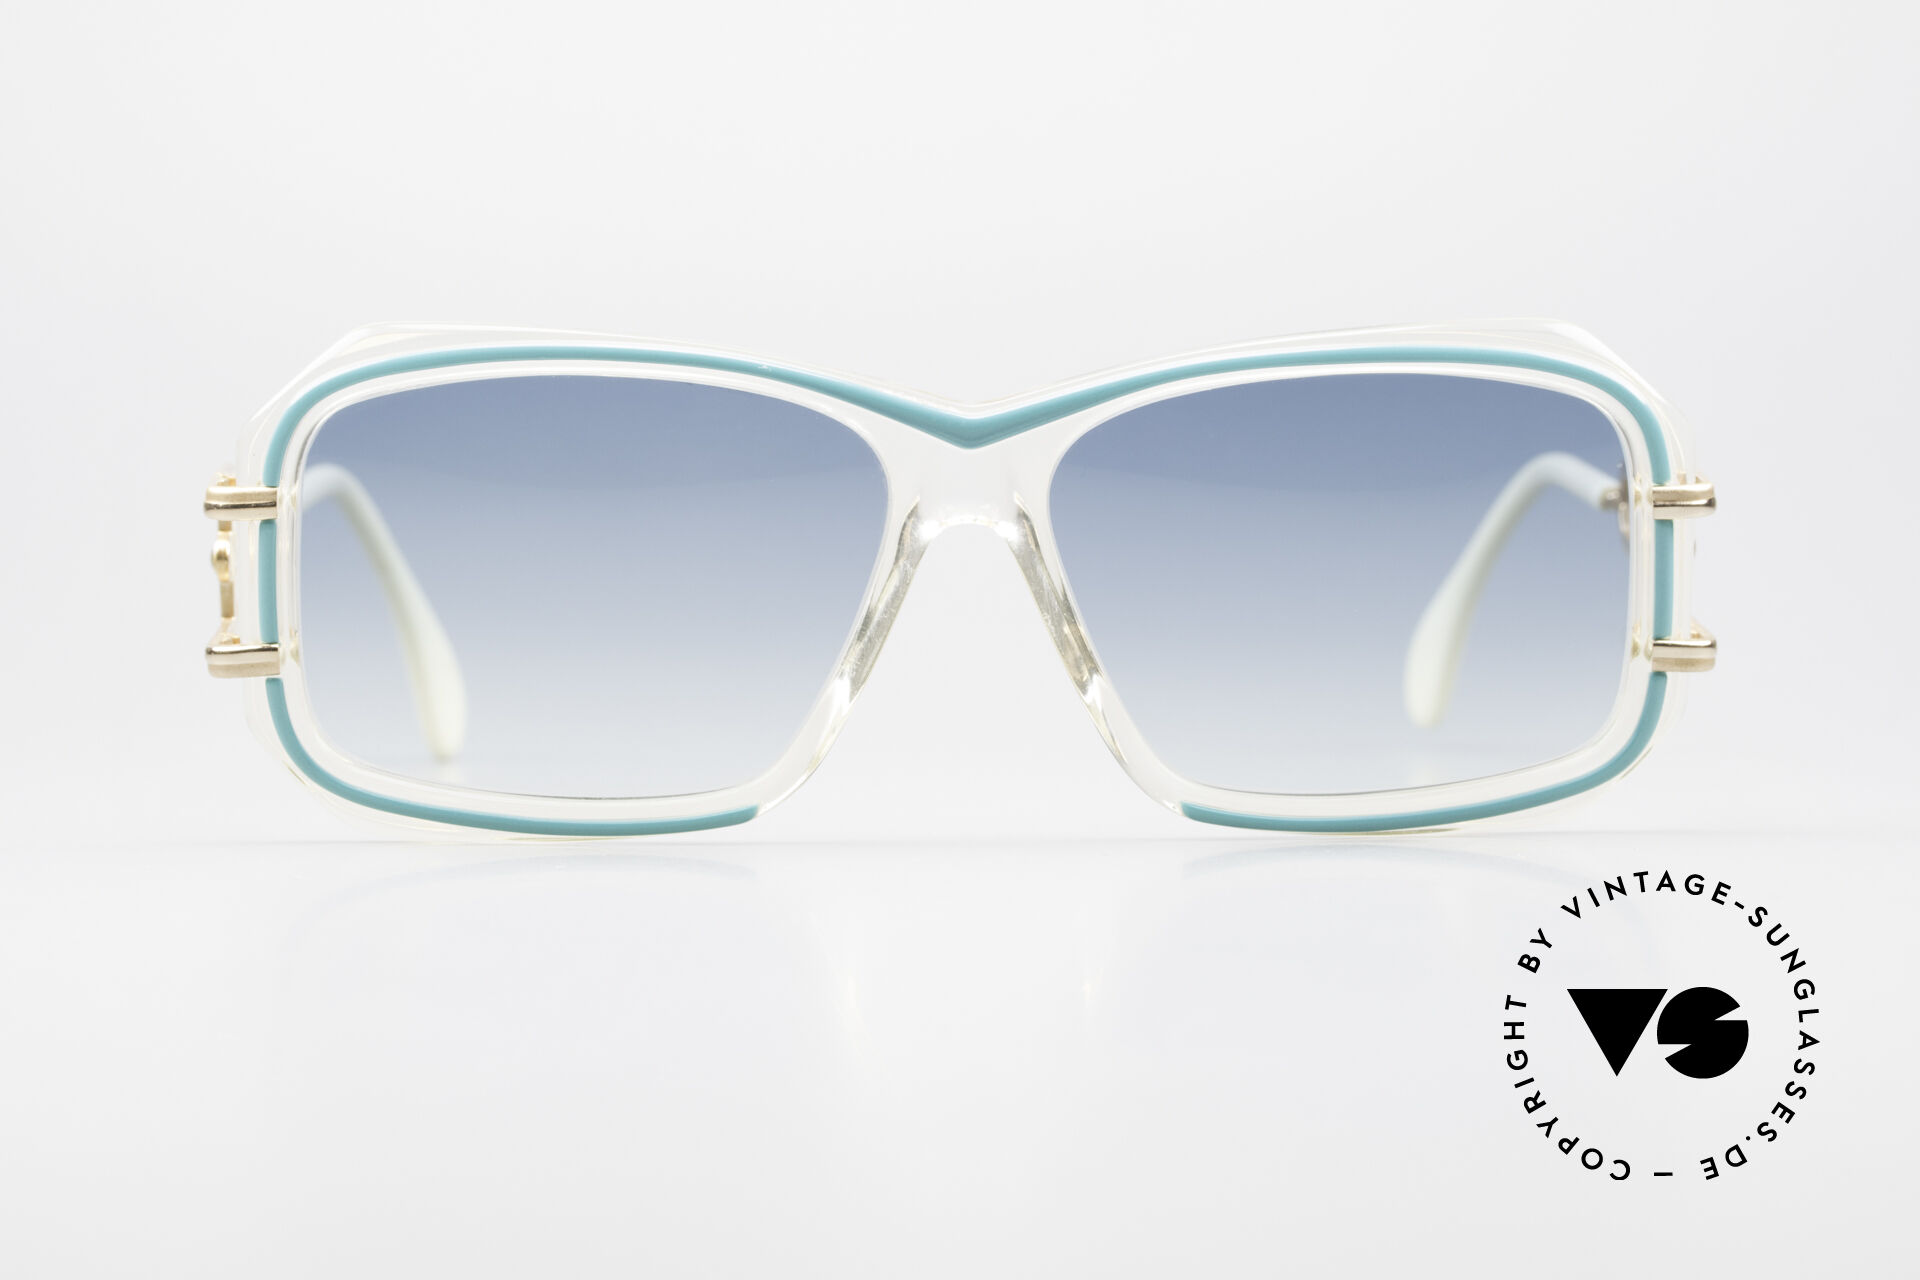 Cazal 173 Hip Hop Cazal 80's Shades, clear synthetic frame with striking metal temples, Made for Women